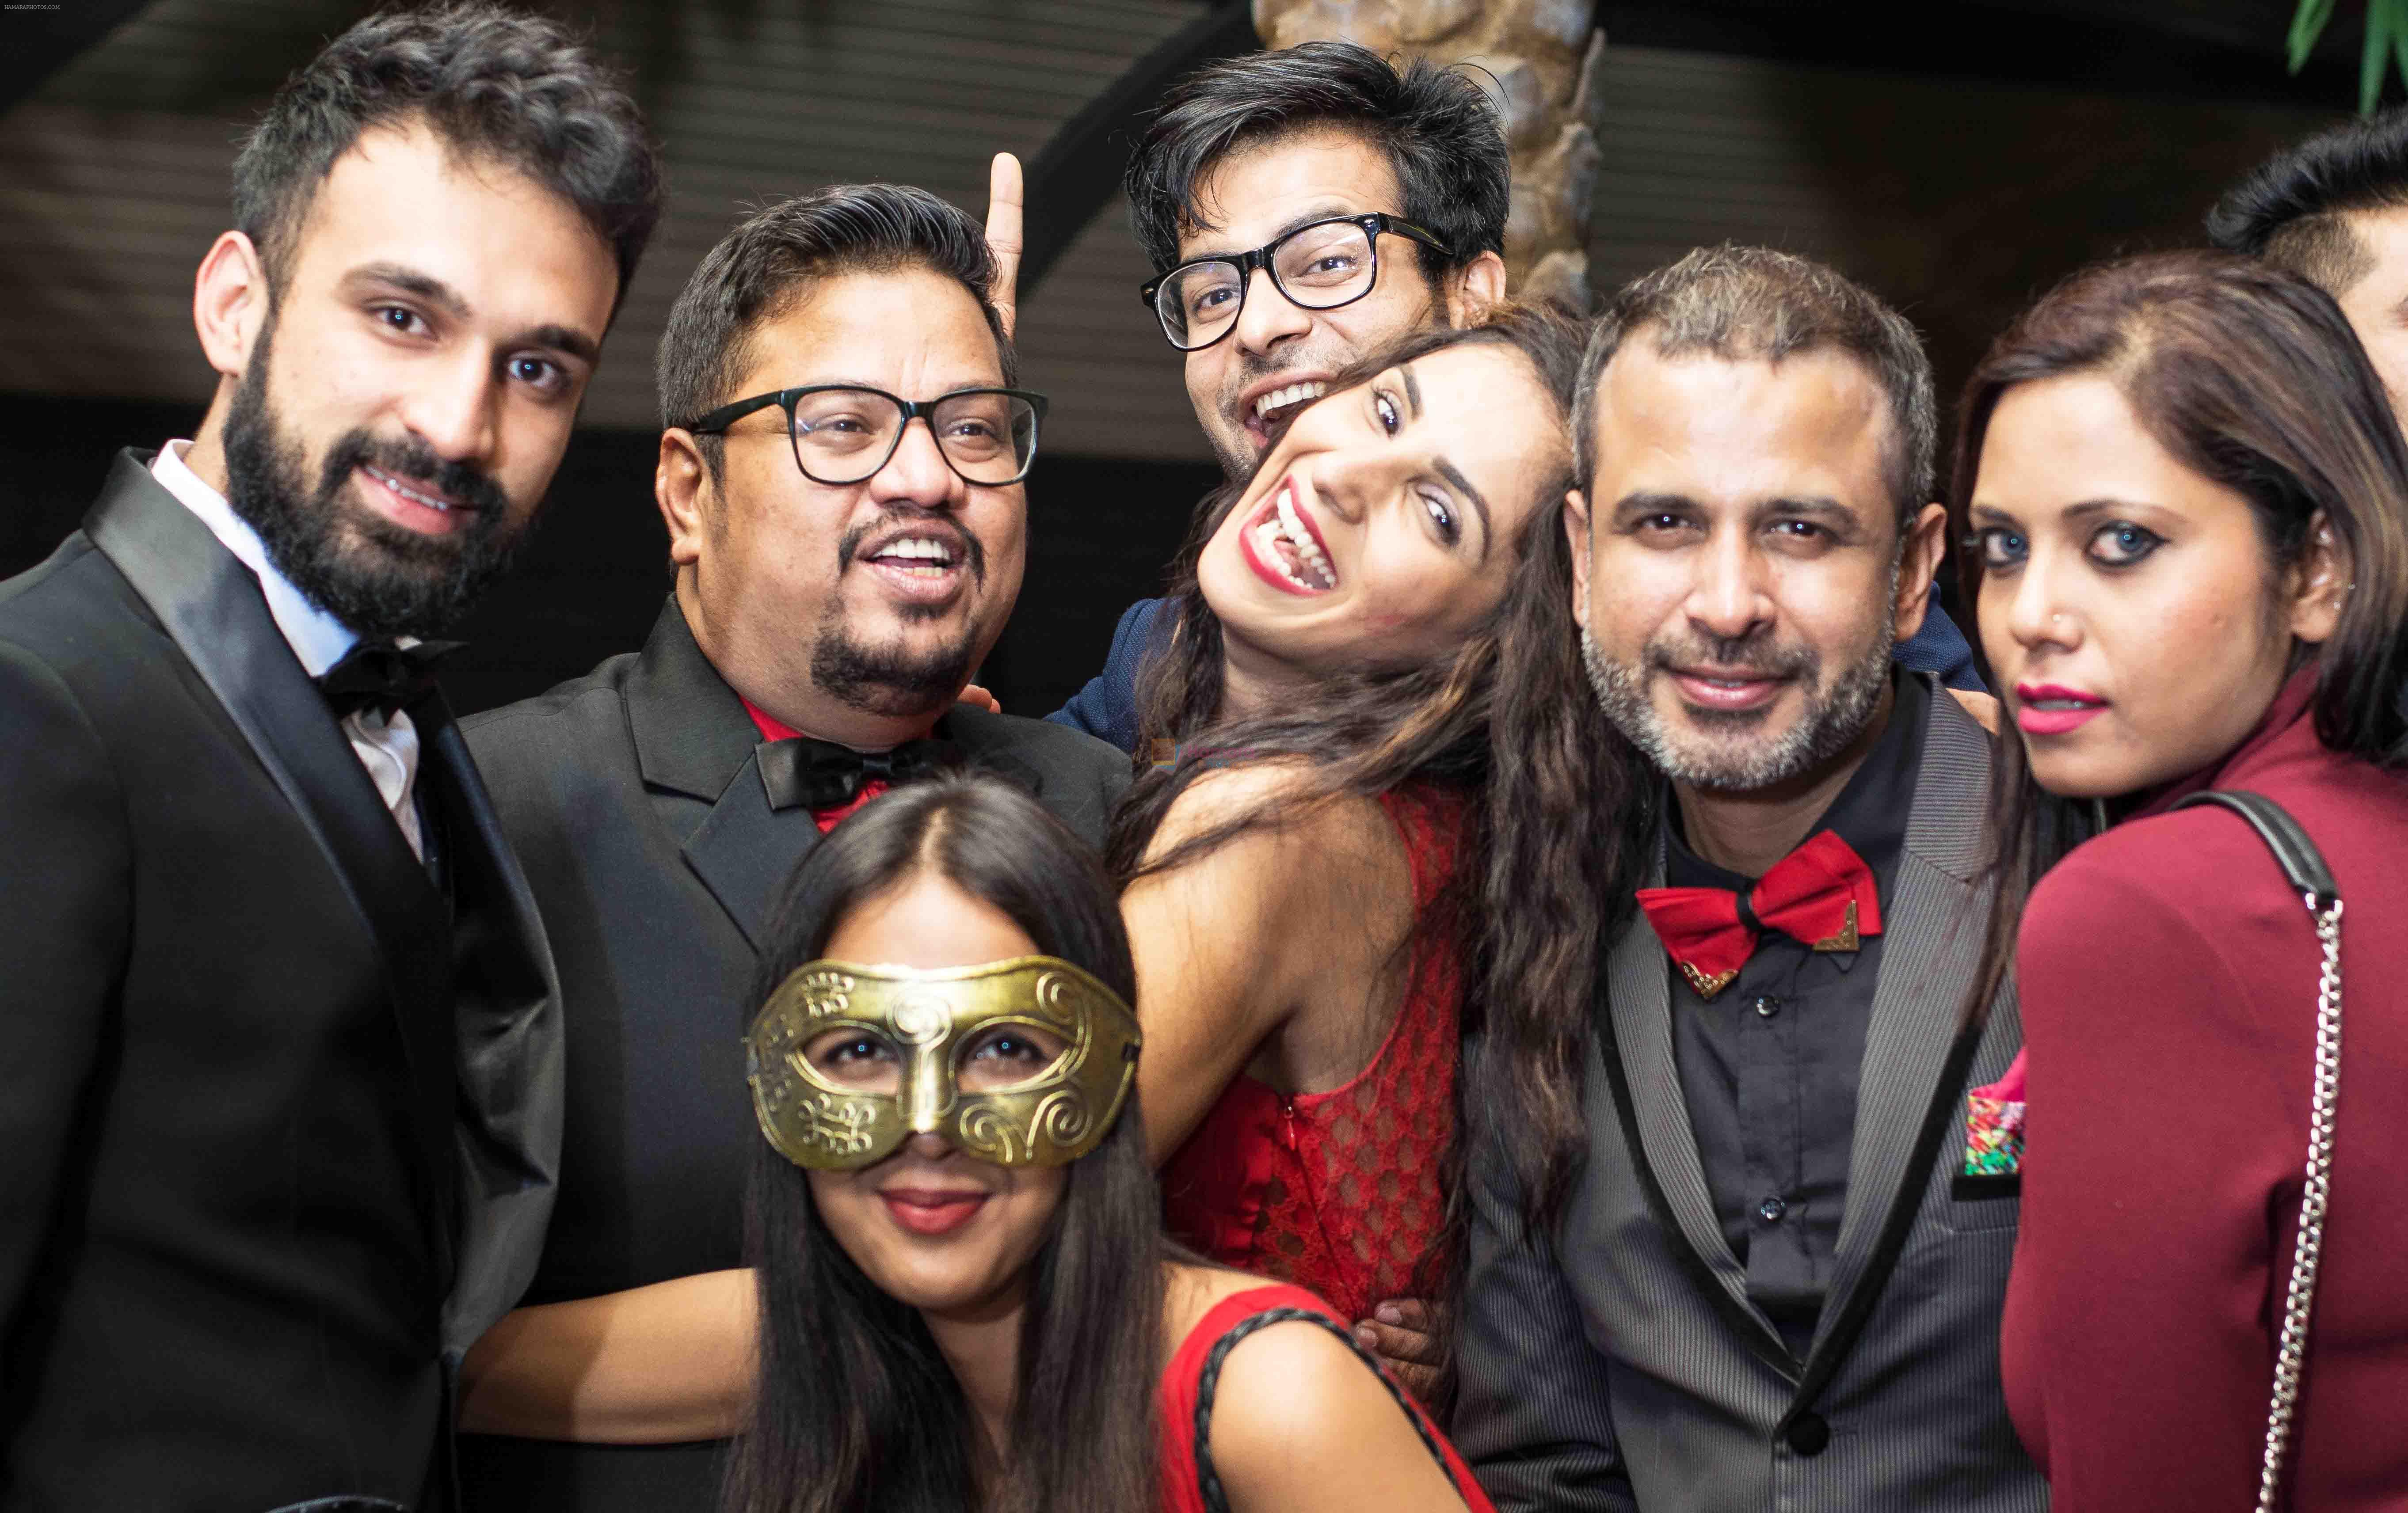 Celebs in a selfie mode with Fashion Director Shakir Shaikh's Theme Based Festive Party at Opa! Bar Cafe.1